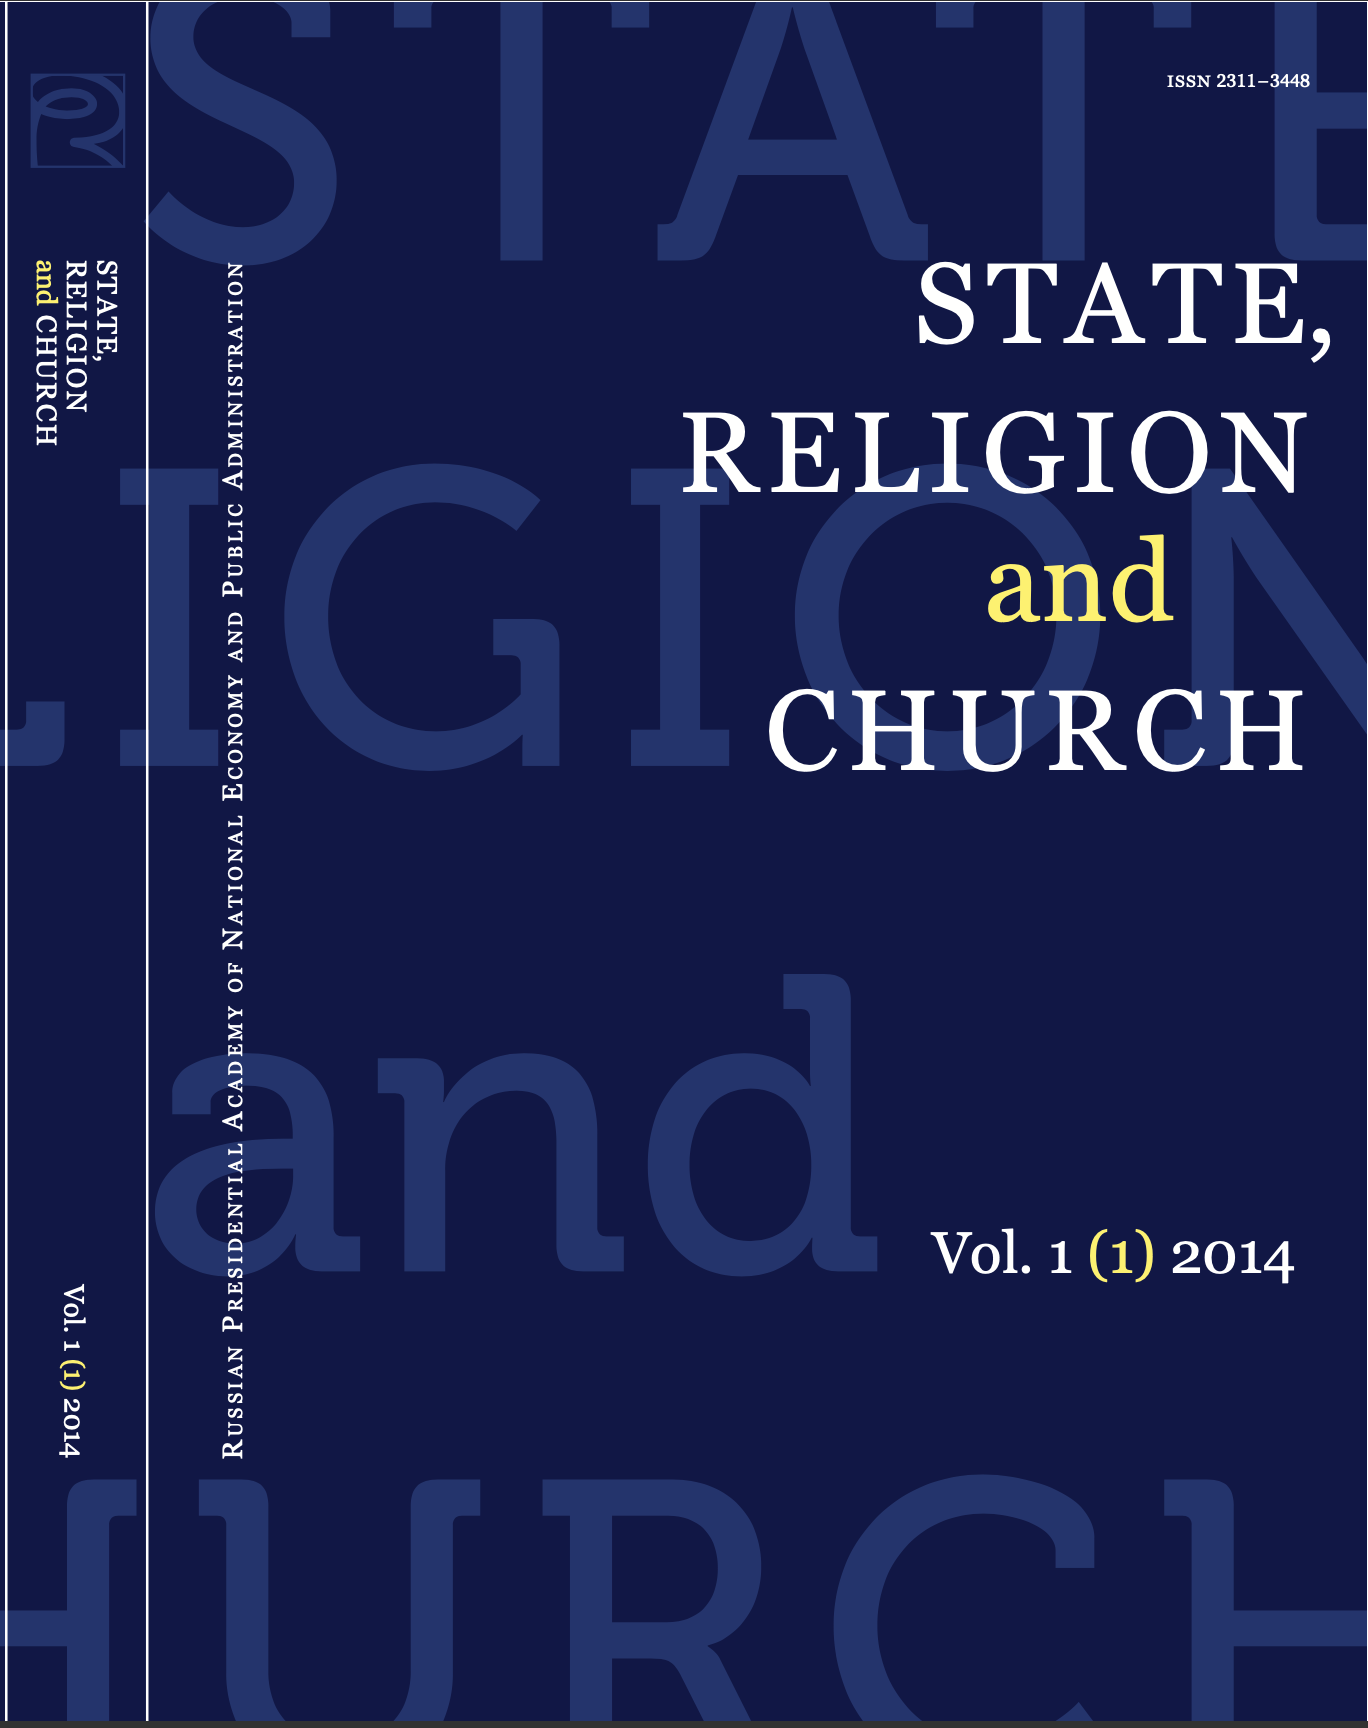 The journal's title, State, Religion and Church is arranged vertically in white text--except the and, which is in yellow text--on a dark blue background. Parts of the words "state, religion and church" also appear in a lighter blue text in larger letters as part of the background. The journal is labeled volume one, issue, one, 2014. It has RANEPA's full name written on the left side and the school's logo on the spine along with the journal's title and volume and issue information. The ISSN is in the upper righthand corner.